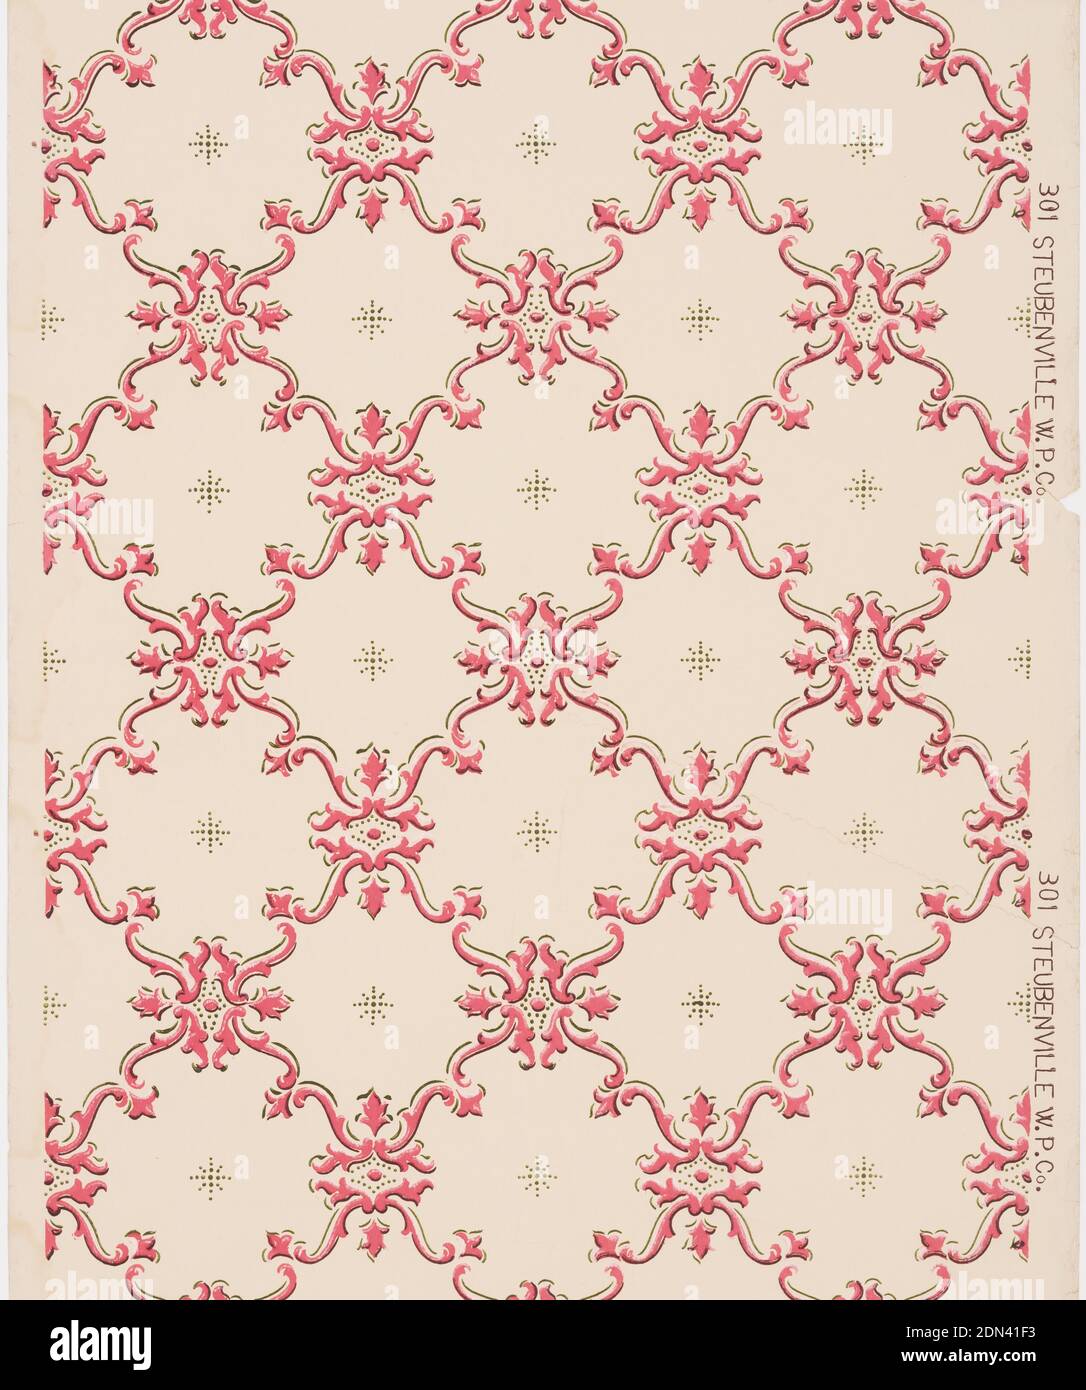 Ceiling paper, Steubenville Wallpaper Company, The, 1905, Machine-printed paper, On light gray ground, dark pink scroll treillage, containing asterisks made up of dots., Steubenville, Ohio, USA, 1905–1915, Wallcoverings, Ceiling paper Stock Photo